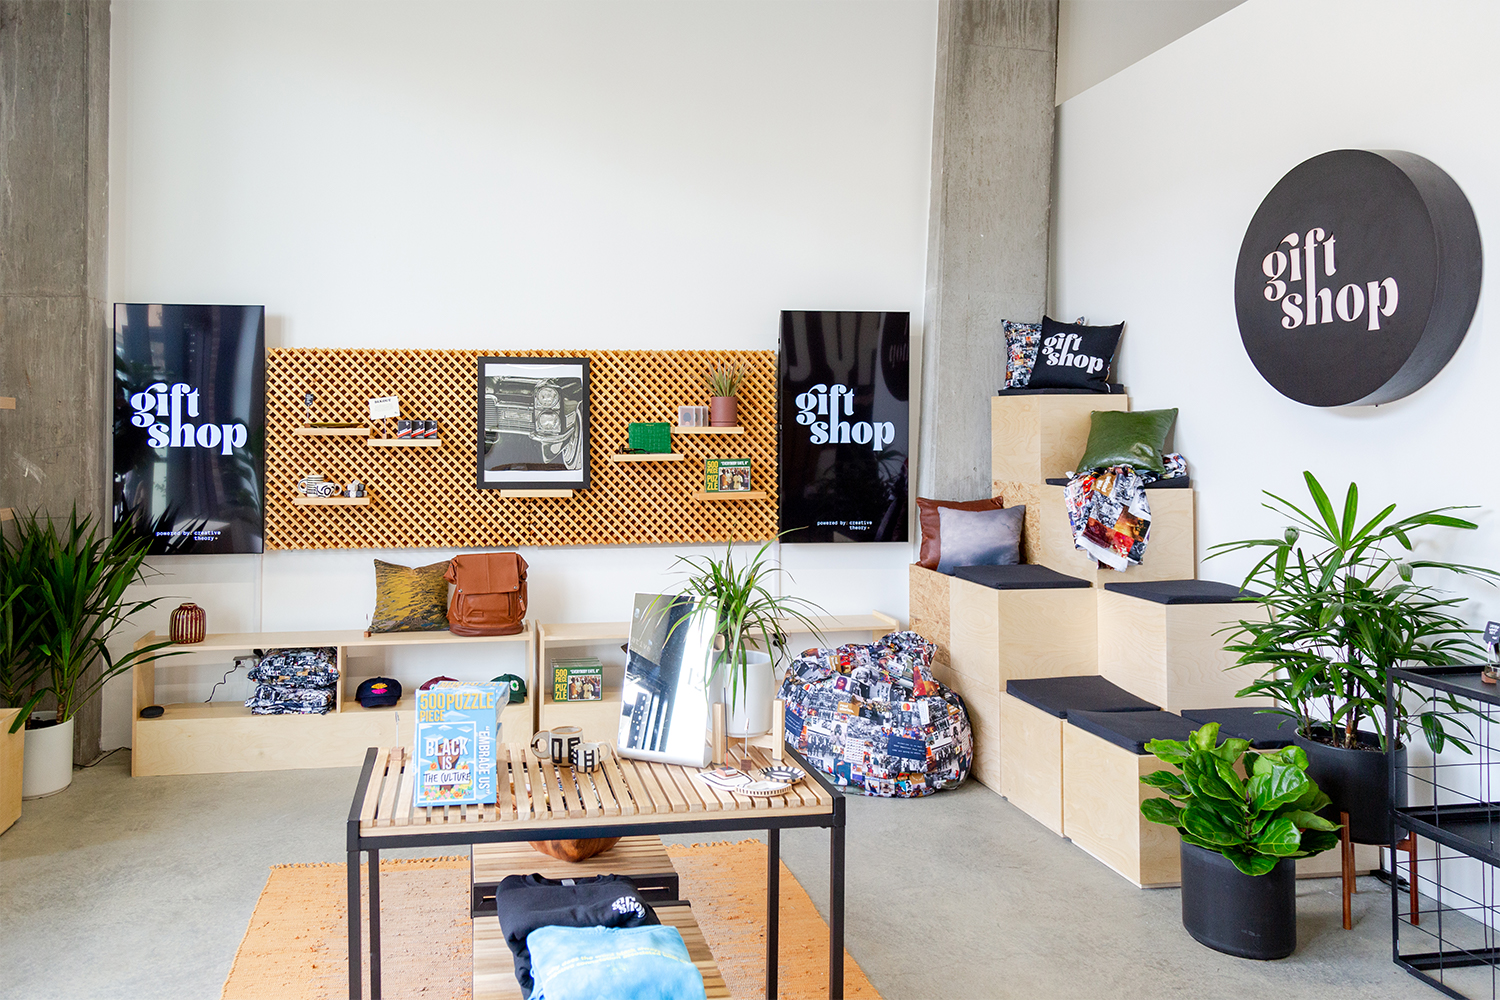 DC’s New “Gift Shop” Is a Stylish Incubator for Black-Owned Brands